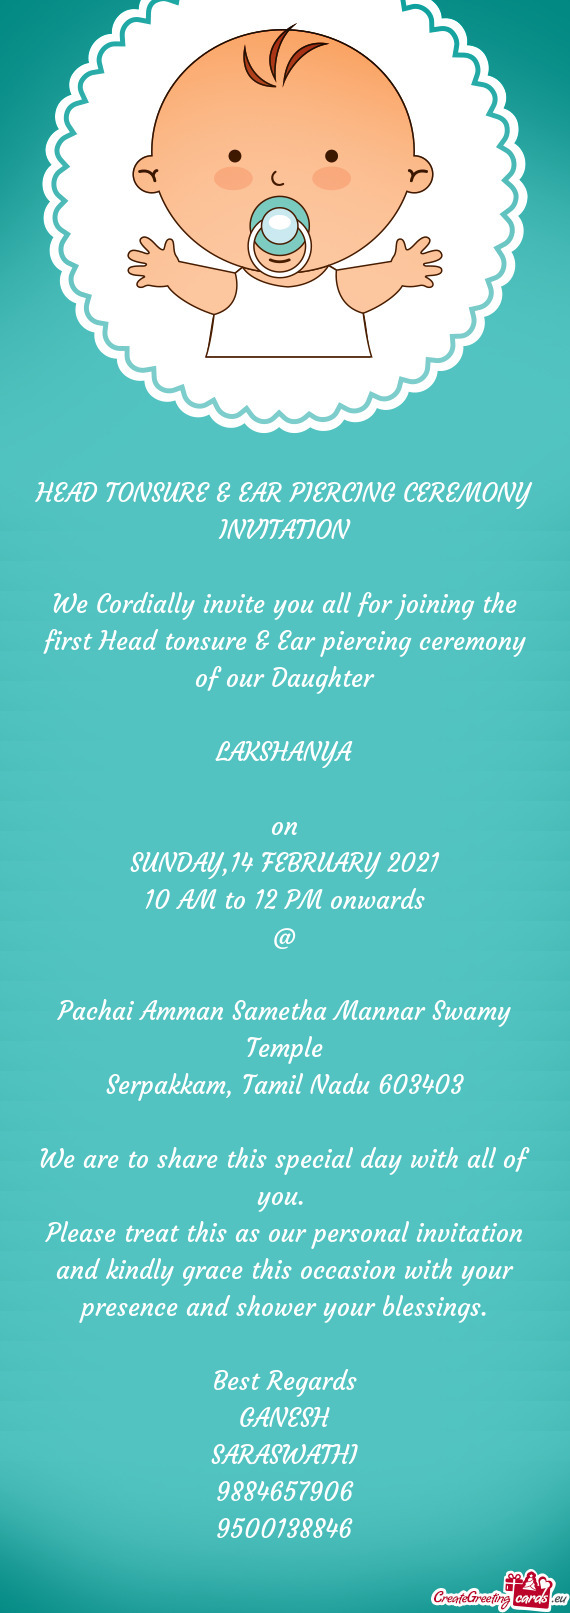 We Cordially invite you all for joining the first Head tonsure & Ear piercing ceremony of our Daught